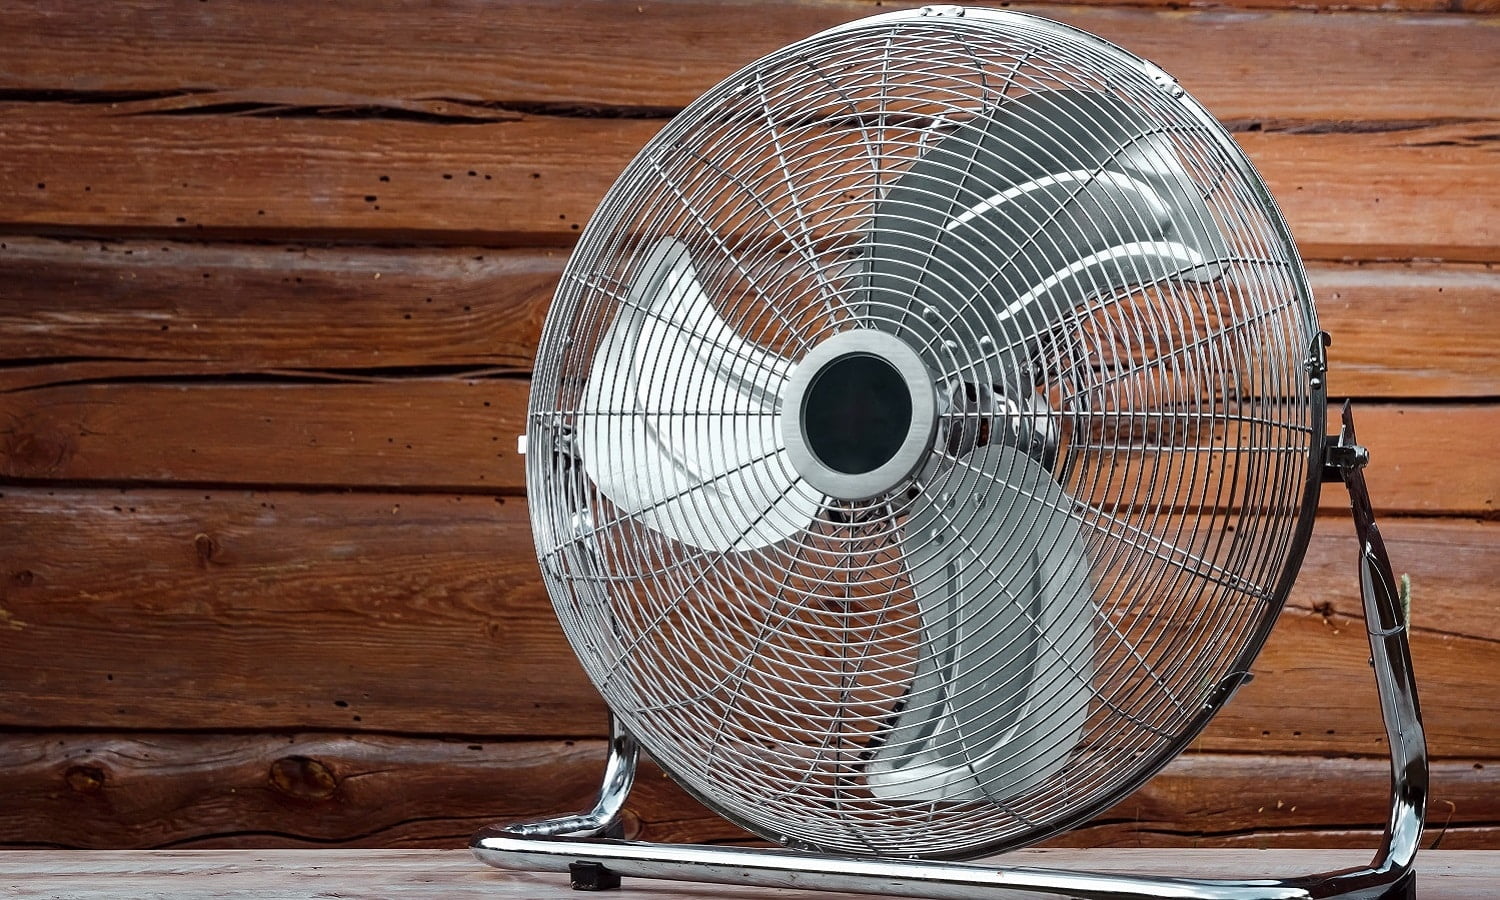 Large tabletop ventilator on the table against the background of a wooden wall. The concept of heat, hot weather, air conditioning.